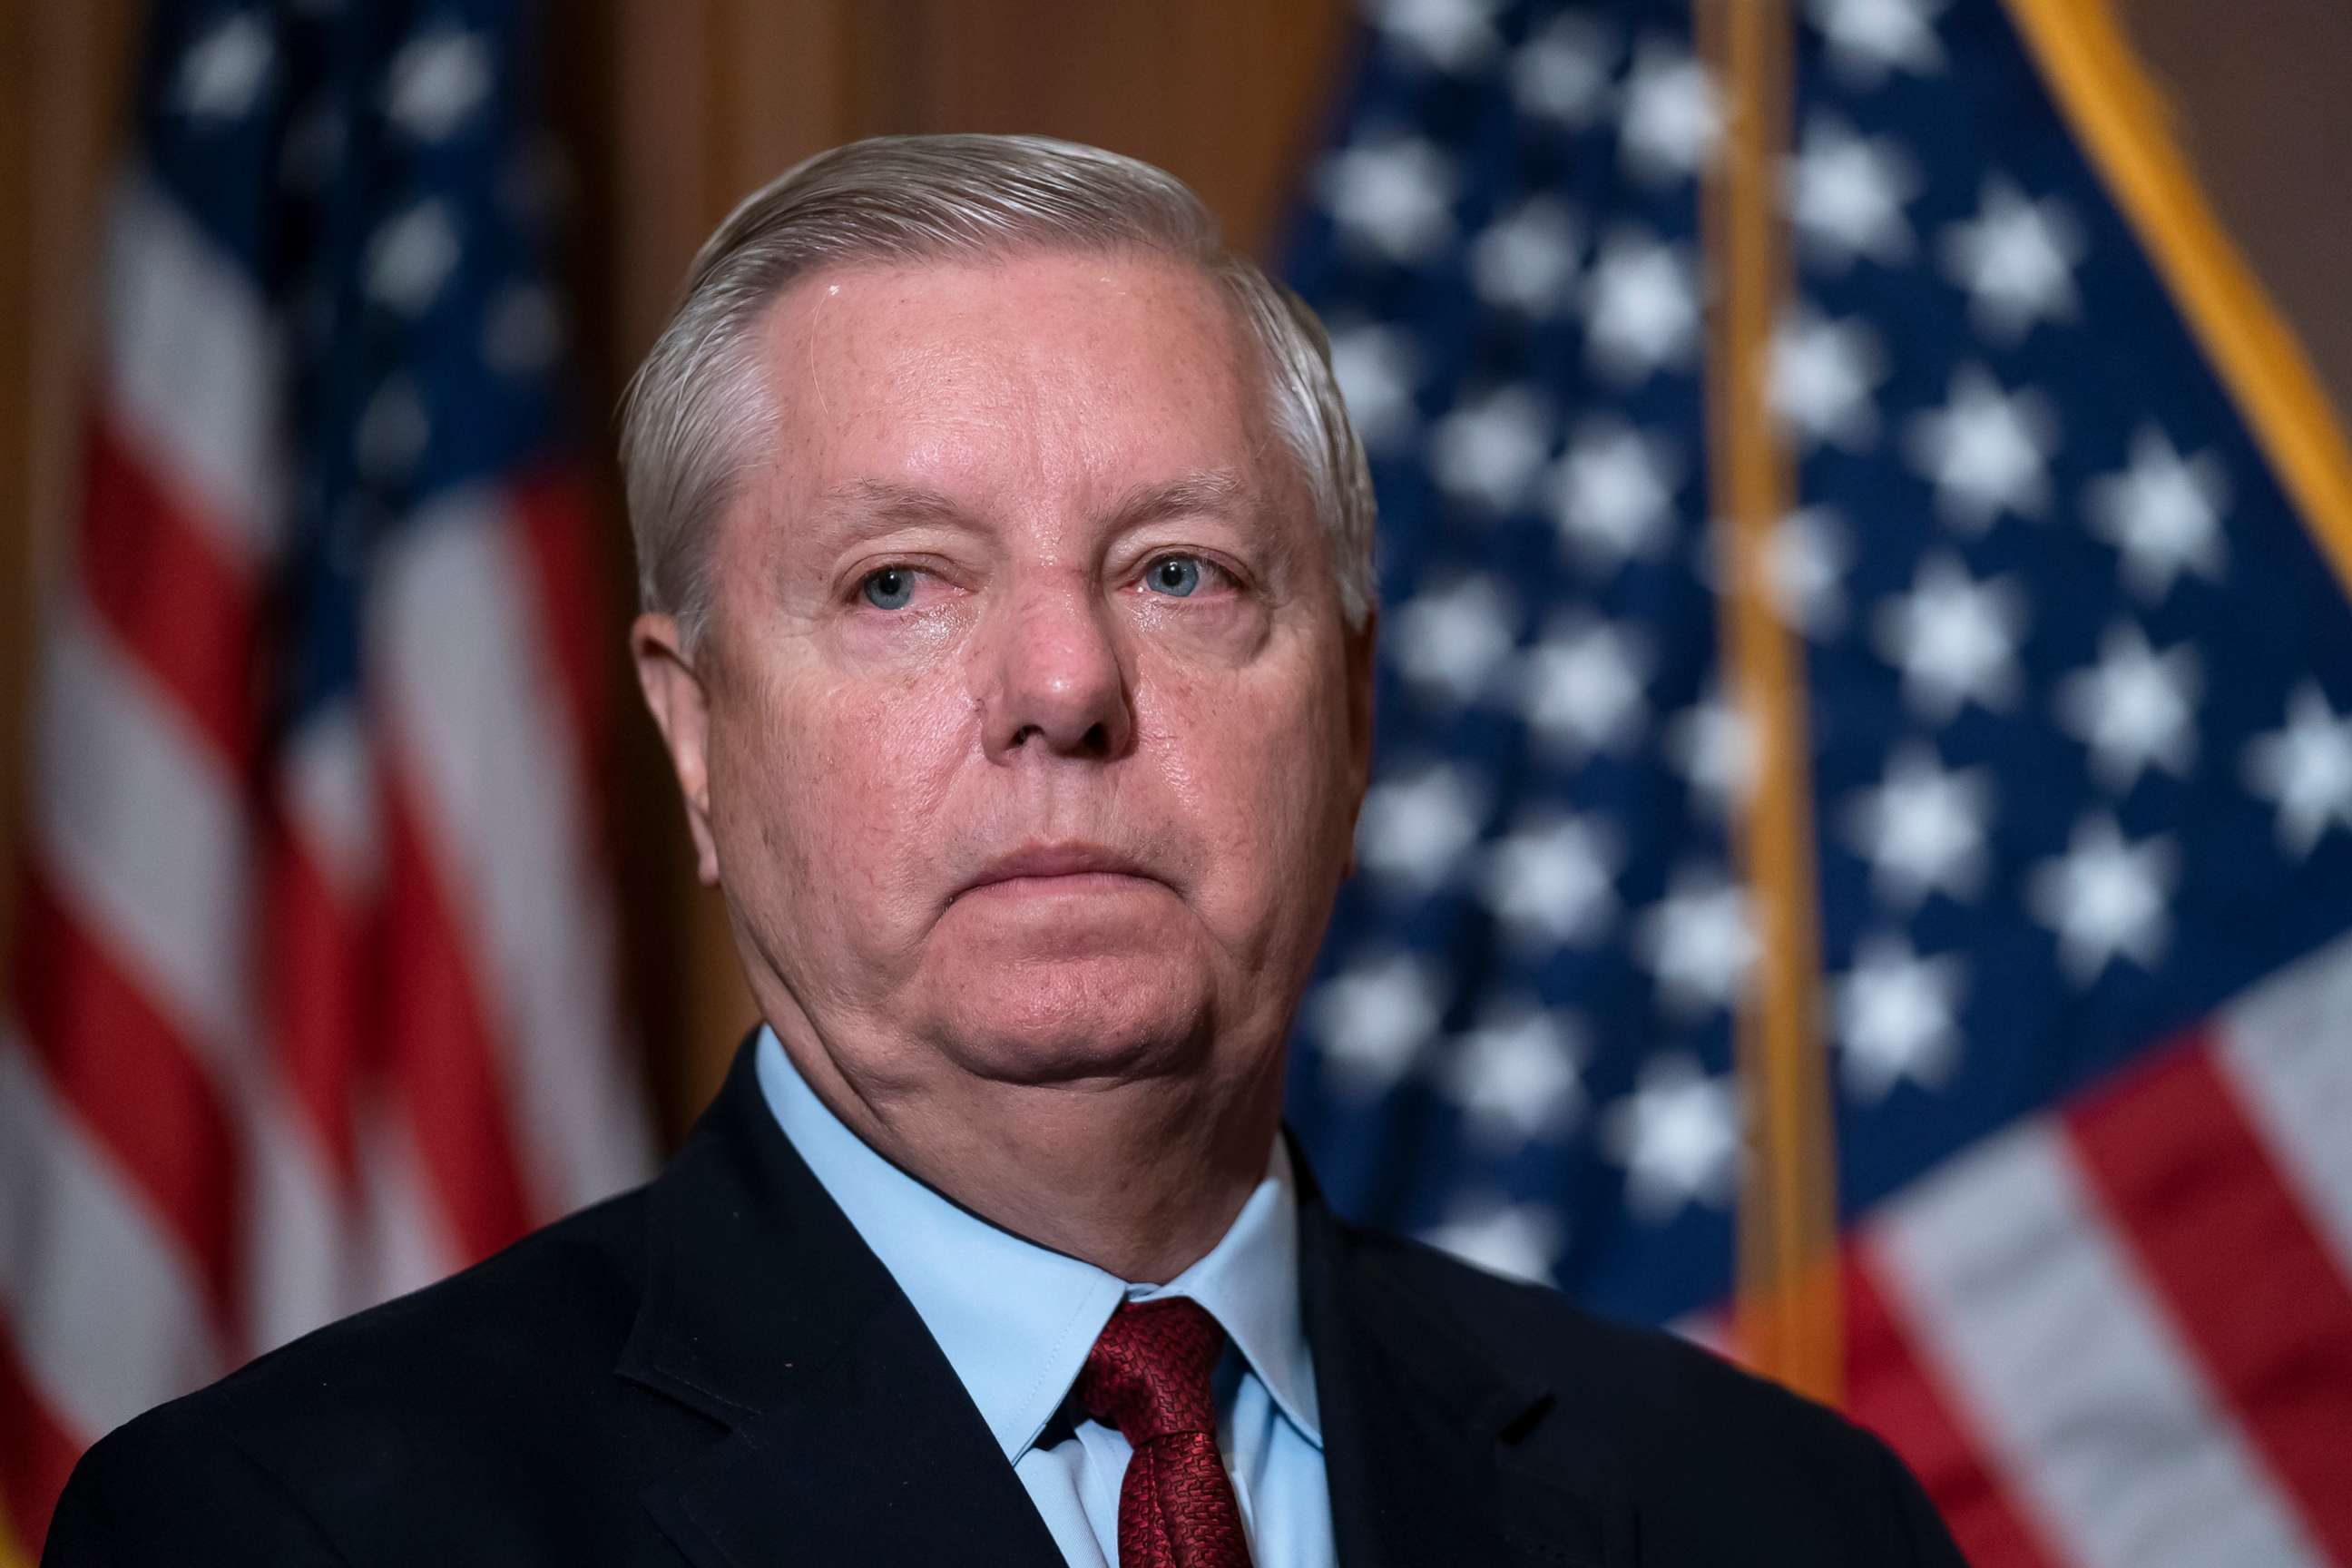 PHOTO: Sen. Lindsey Graham attends a bi-partisan press conference at the Capitol in Washington, Feb. 10, 2022.